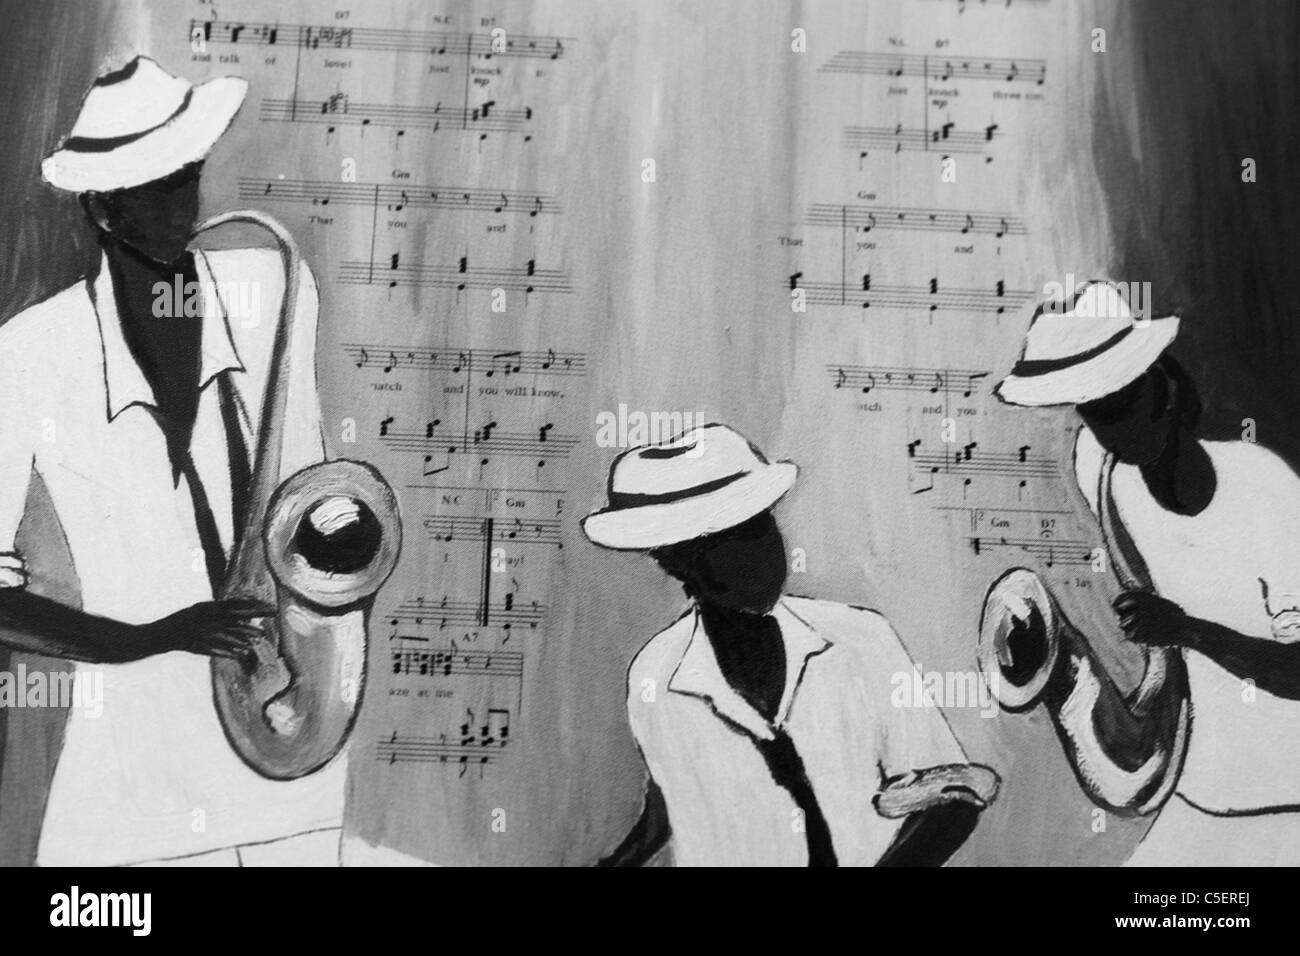 Cuban musicians painted on a music score decorating a house in Prado del Rey, Cadiz province, Andalusia, Spain, March 27, 2011. Stock Photo